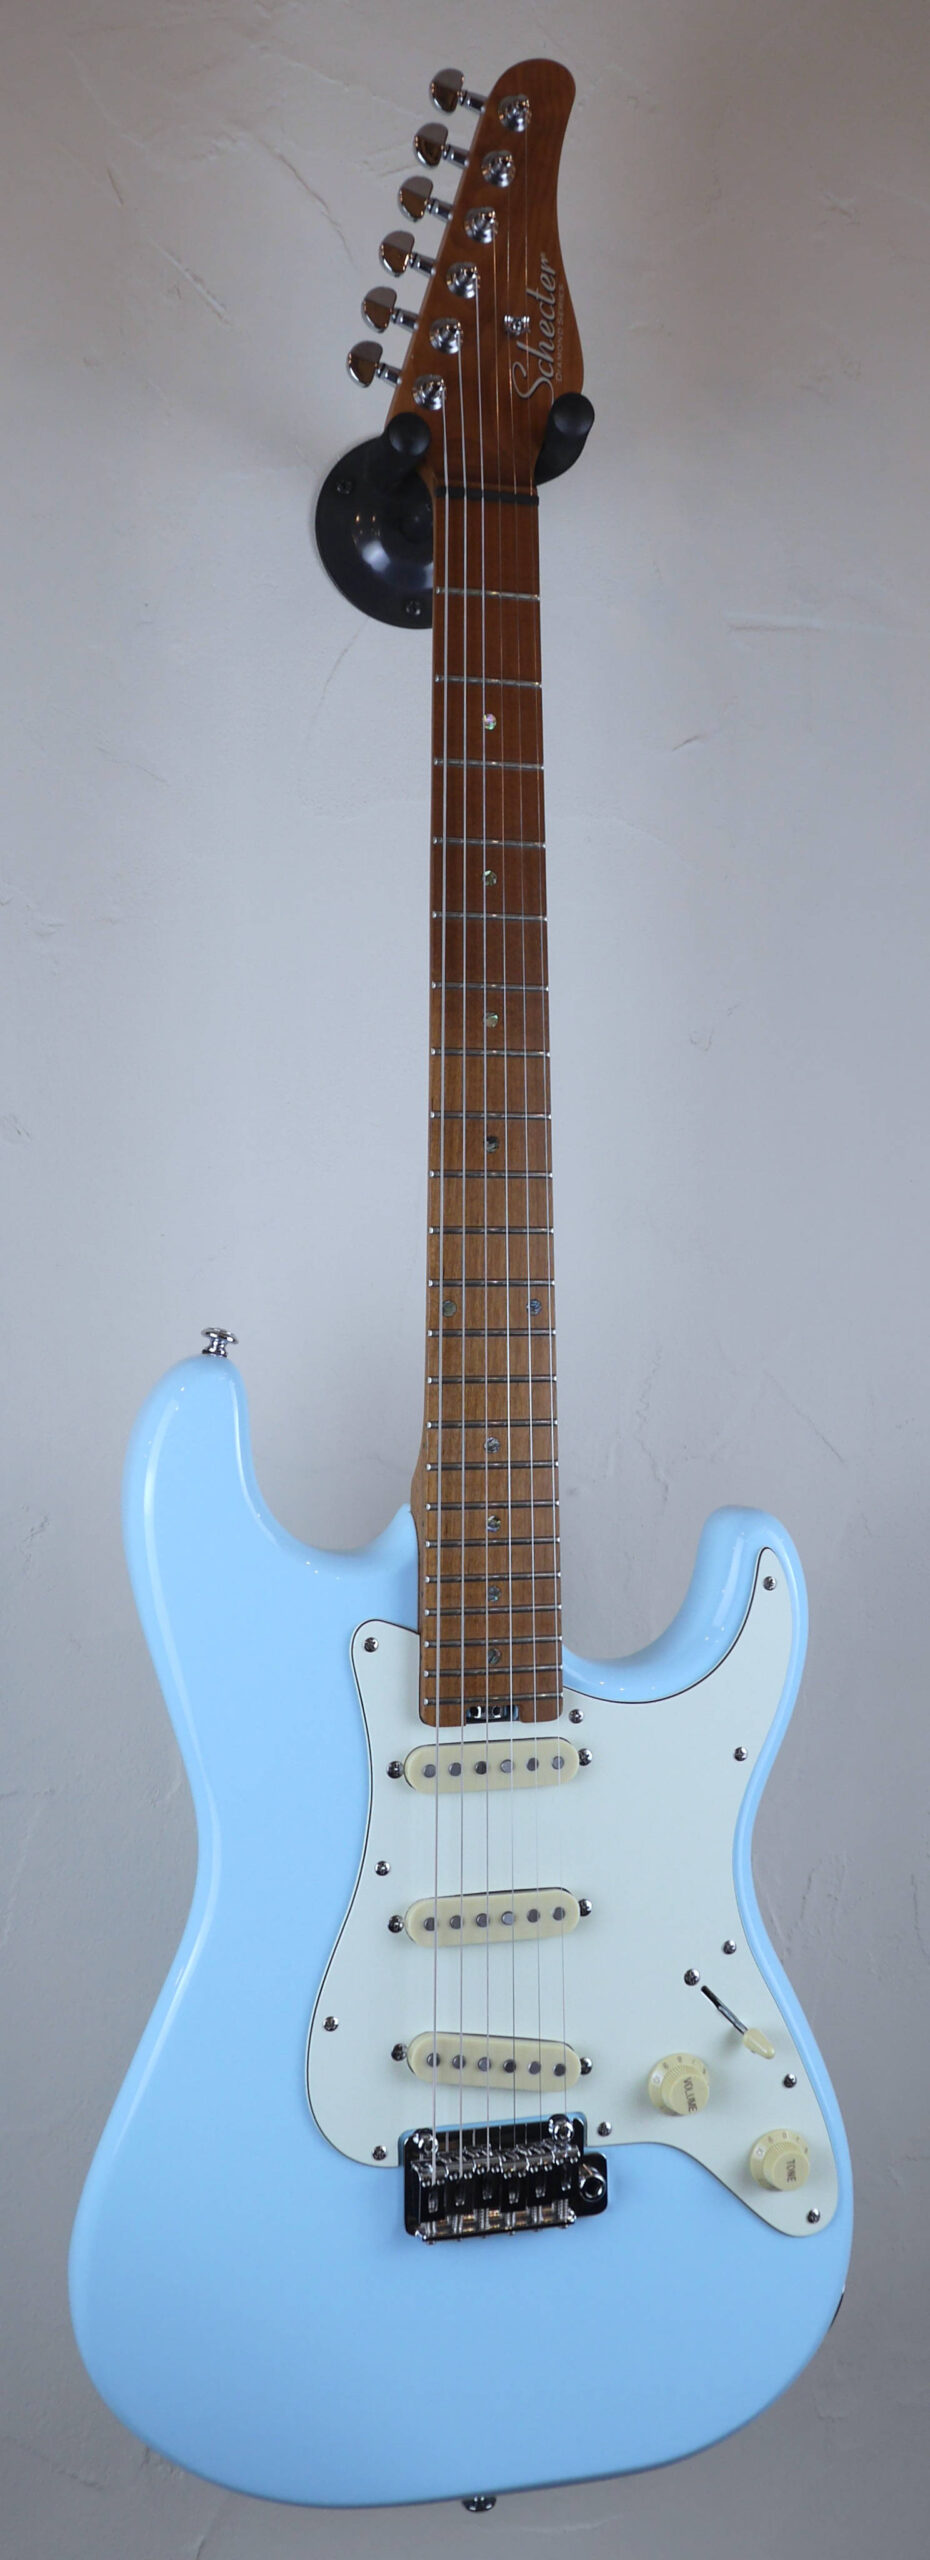 Schecter Traditional Route 66 Chicago 2021 Sugar Paper Blue 1